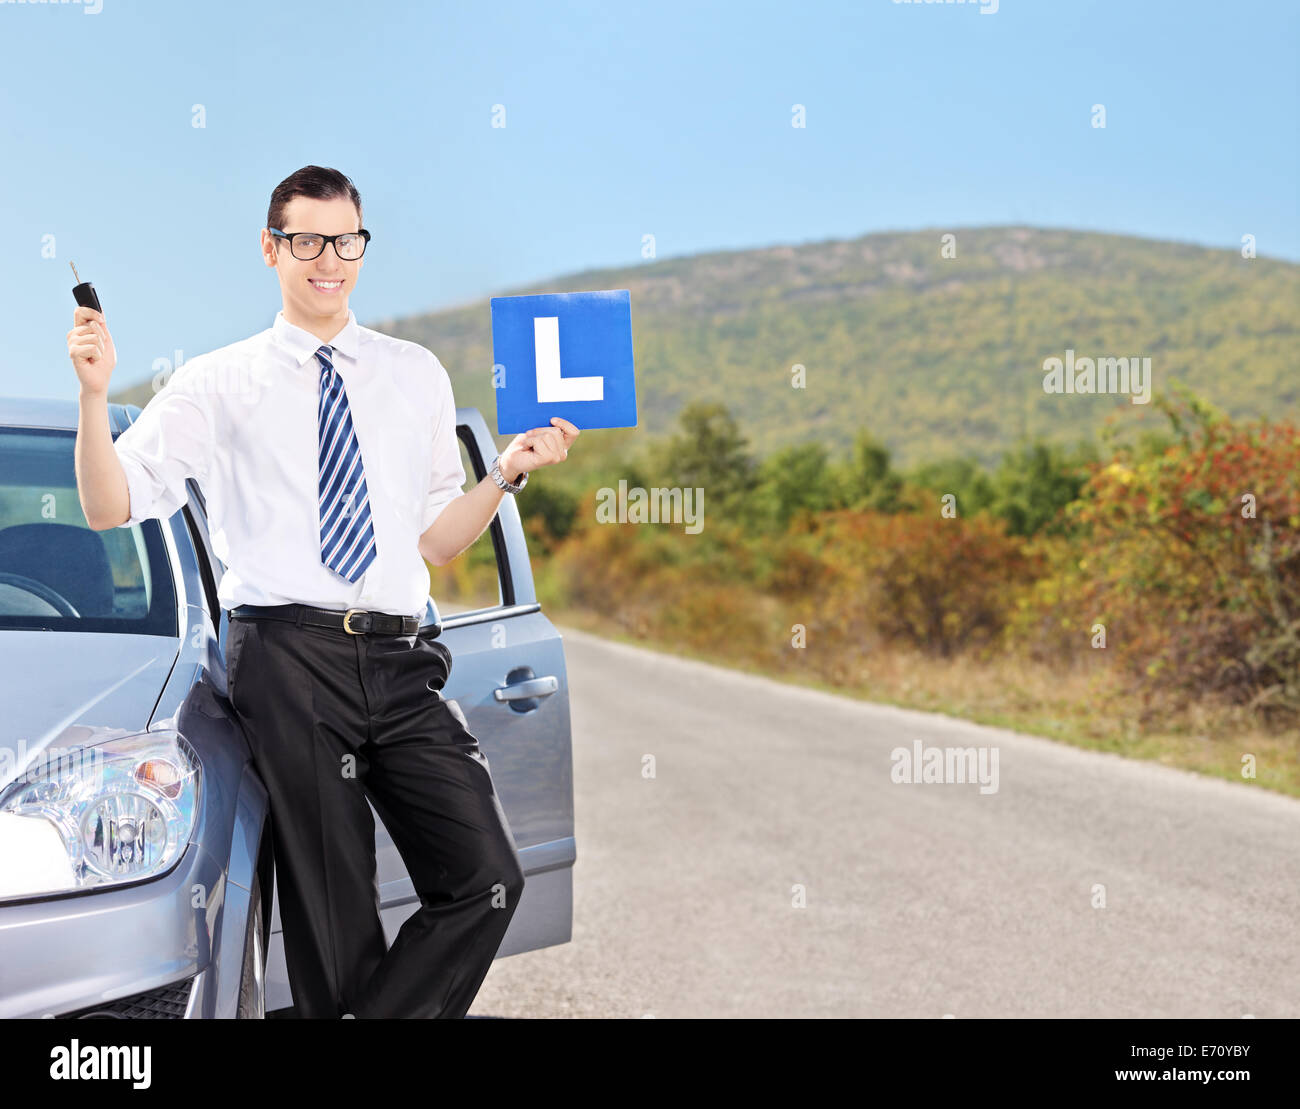 Male driver holding l sign and a car key on an open road shot with tilt and shift lens Stock Photo